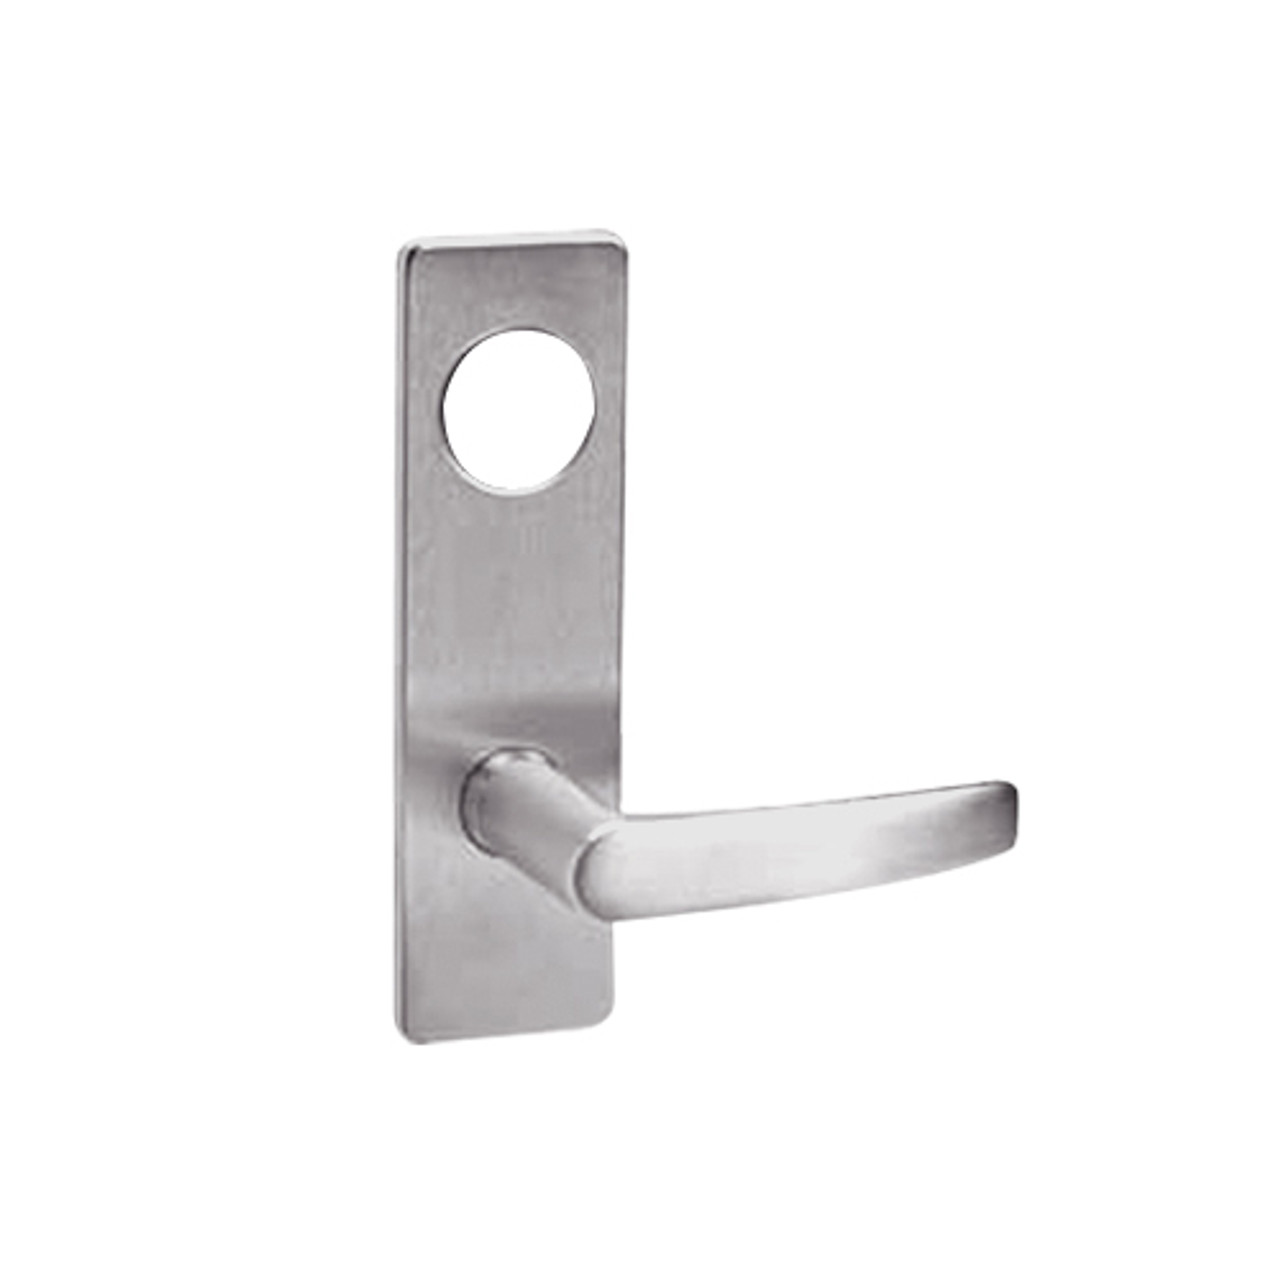 ML2067-ASN-630 Corbin Russwin ML2000 Series Mortise Apartment Locksets with Armstrong Lever and Deadbolt in Satin Stainless